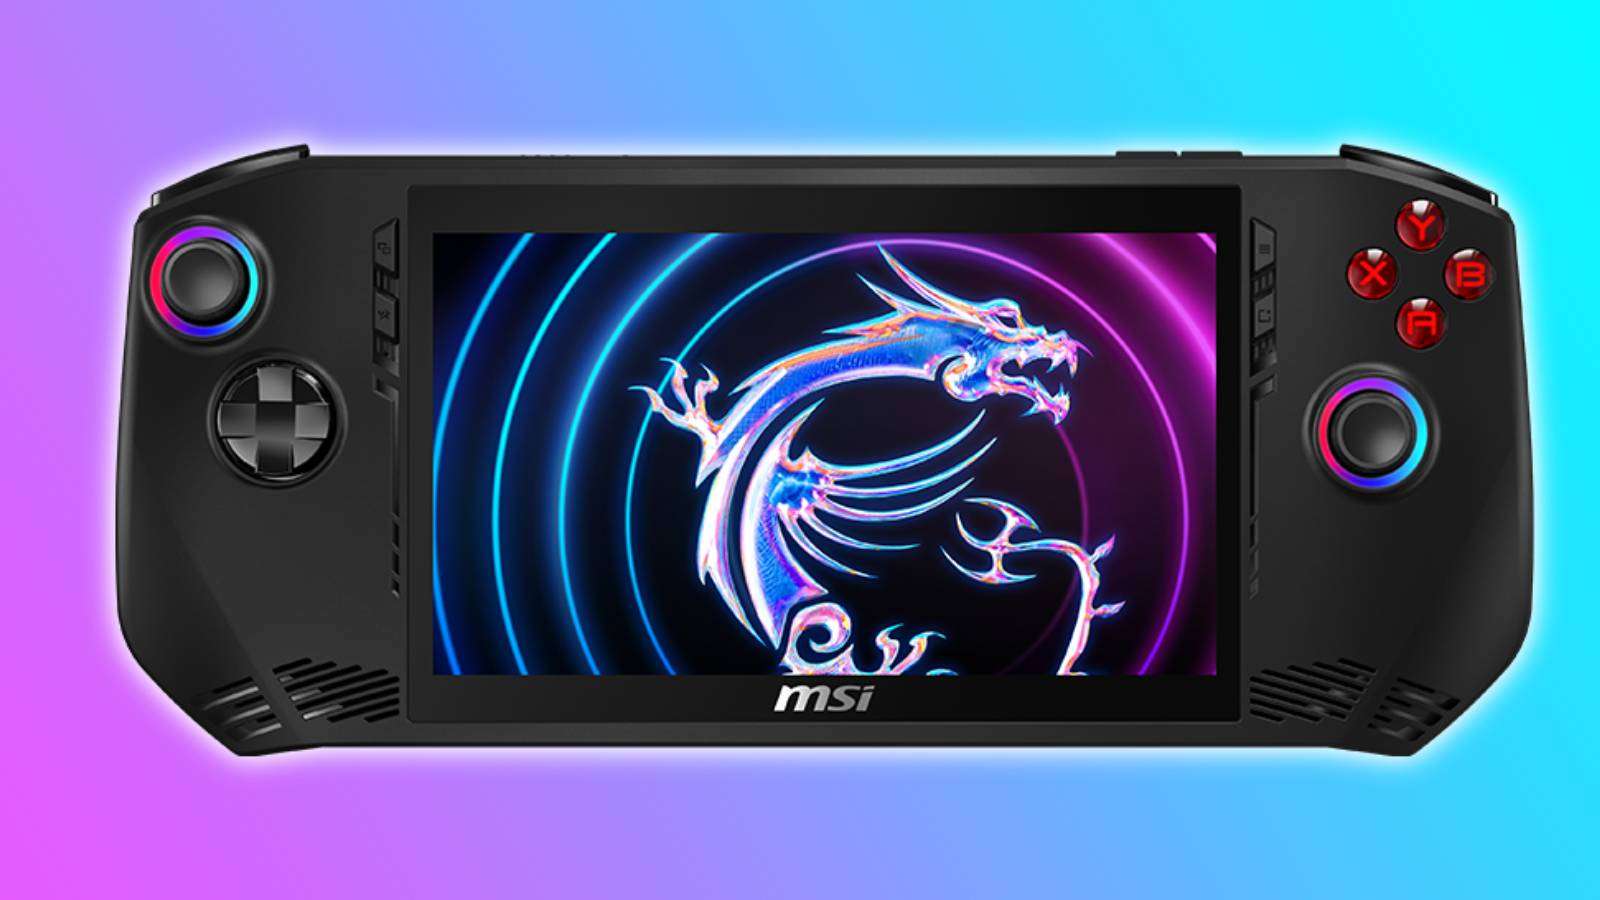 Image of the MSI Claw handheld on a pink and blue background.